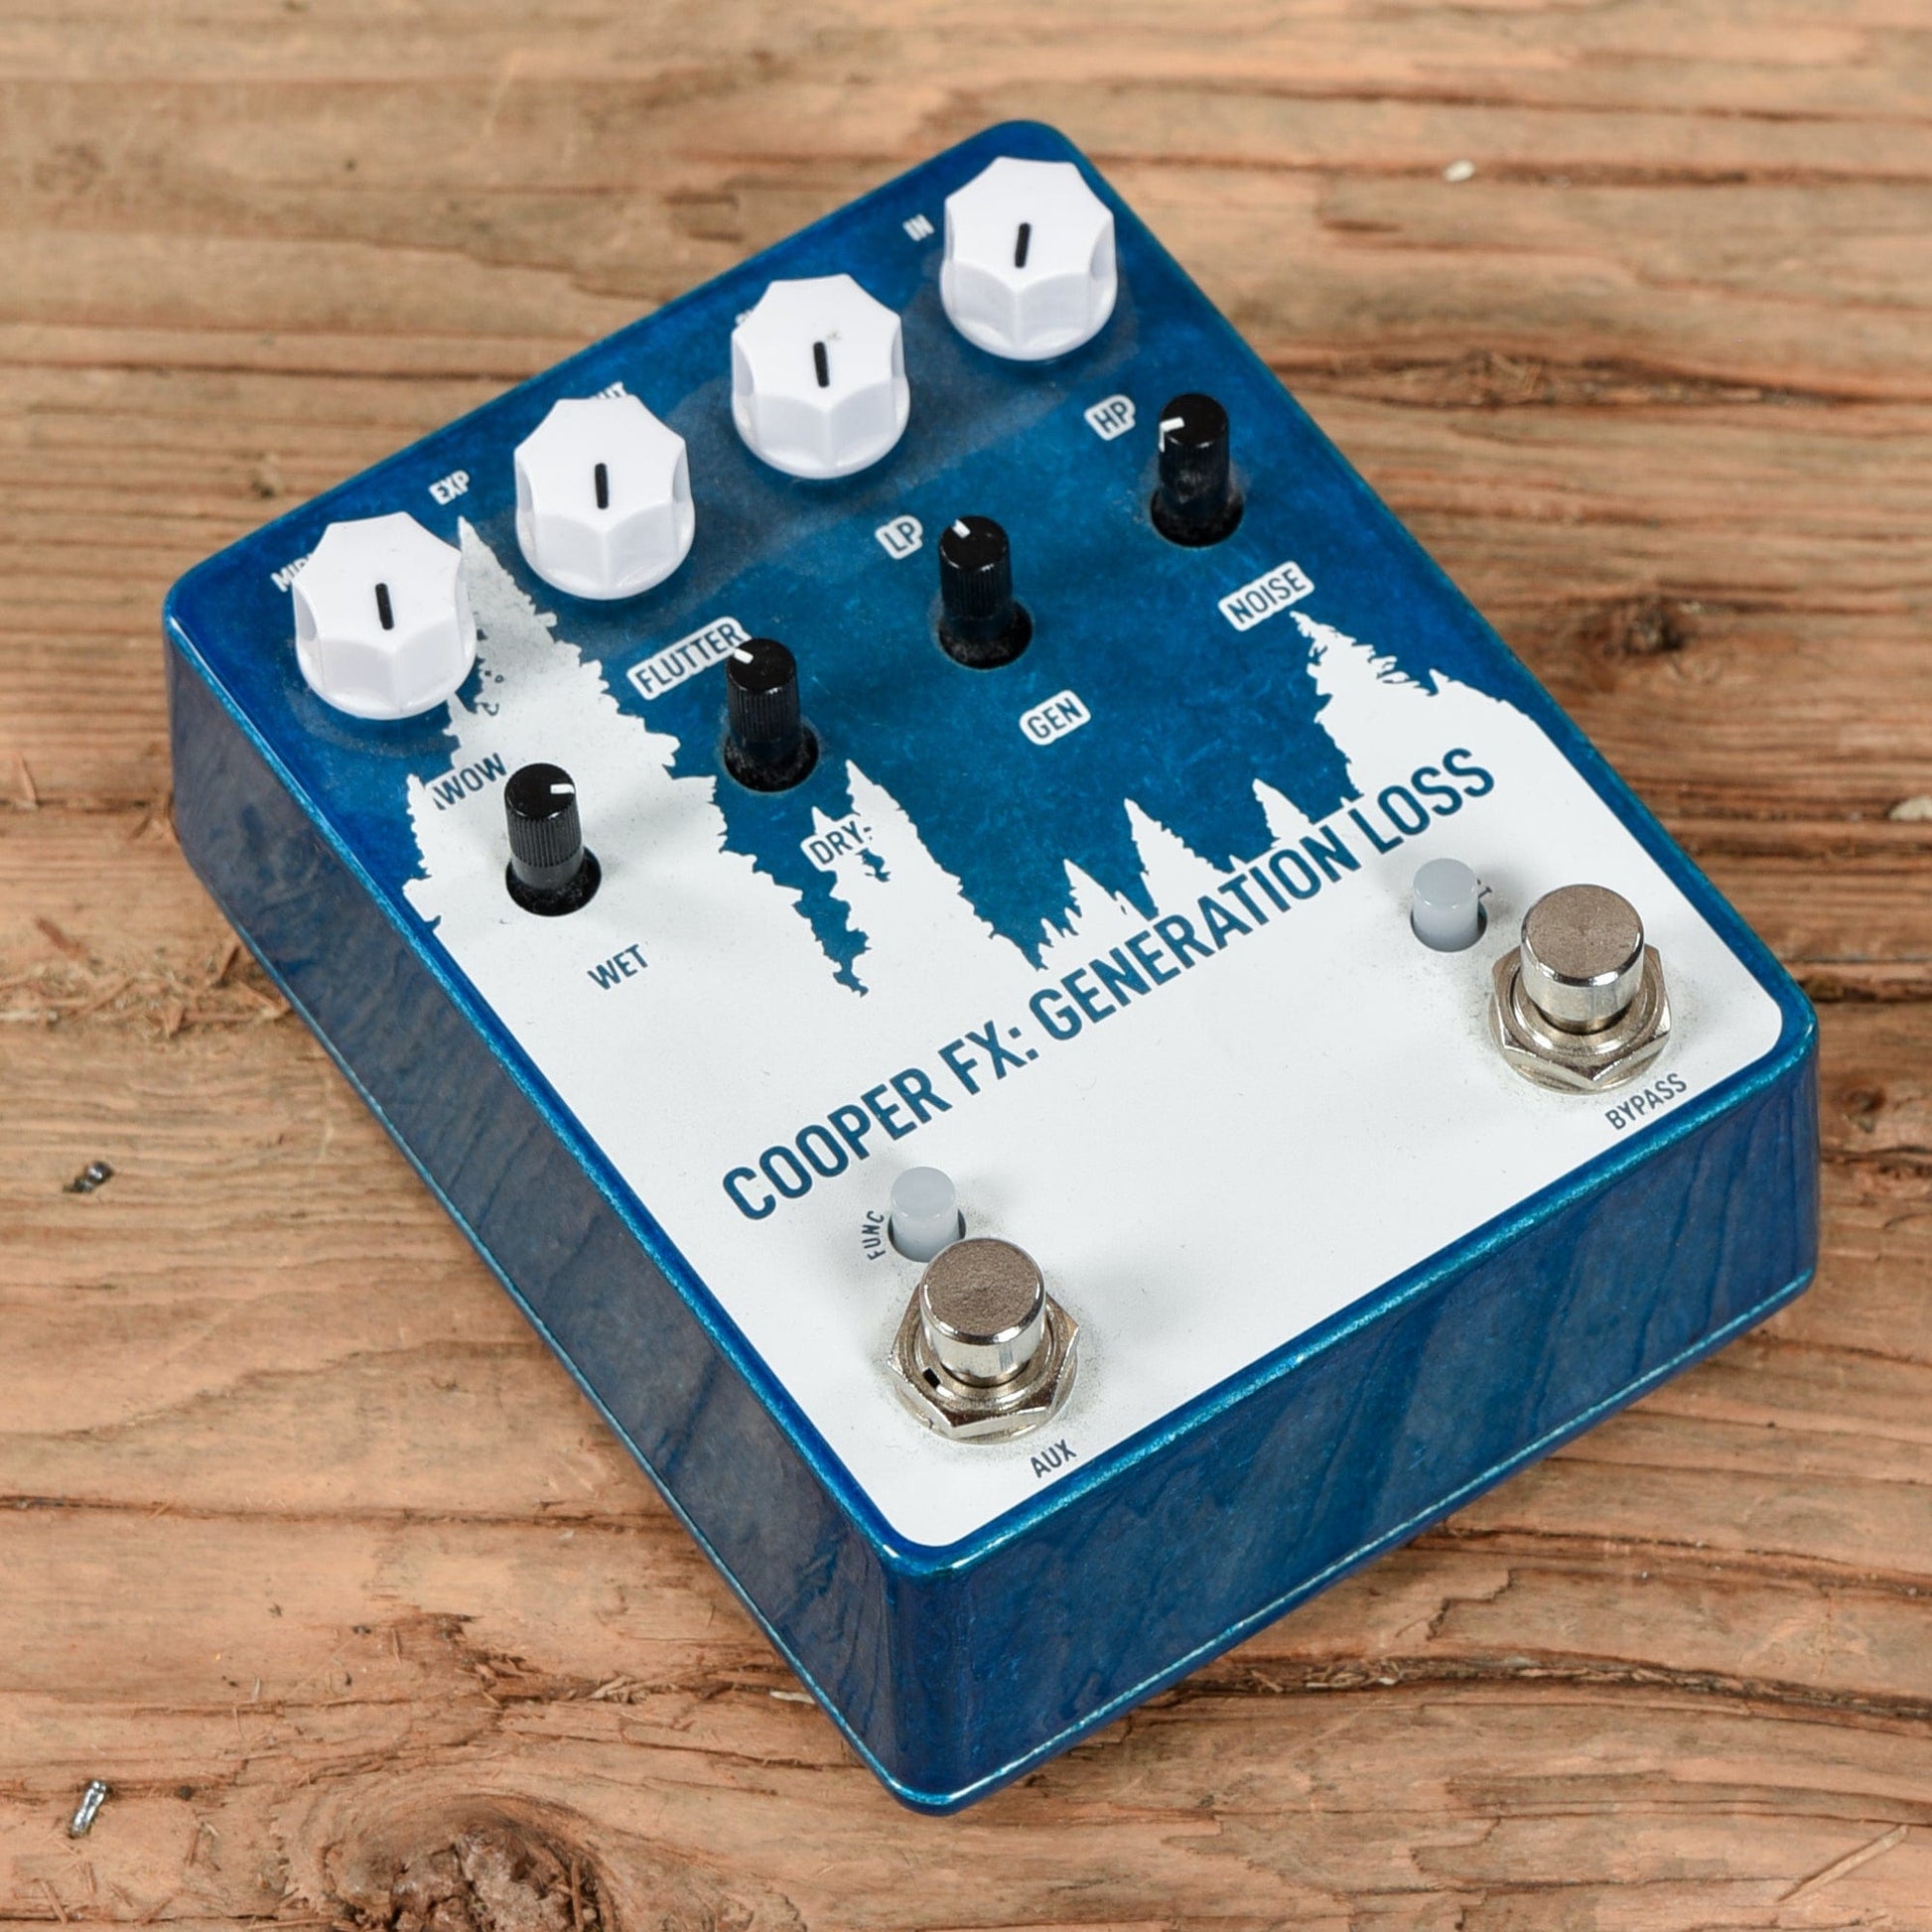 Cooper FX Generation Loss V2 Effects and Pedals / Ring Modulators